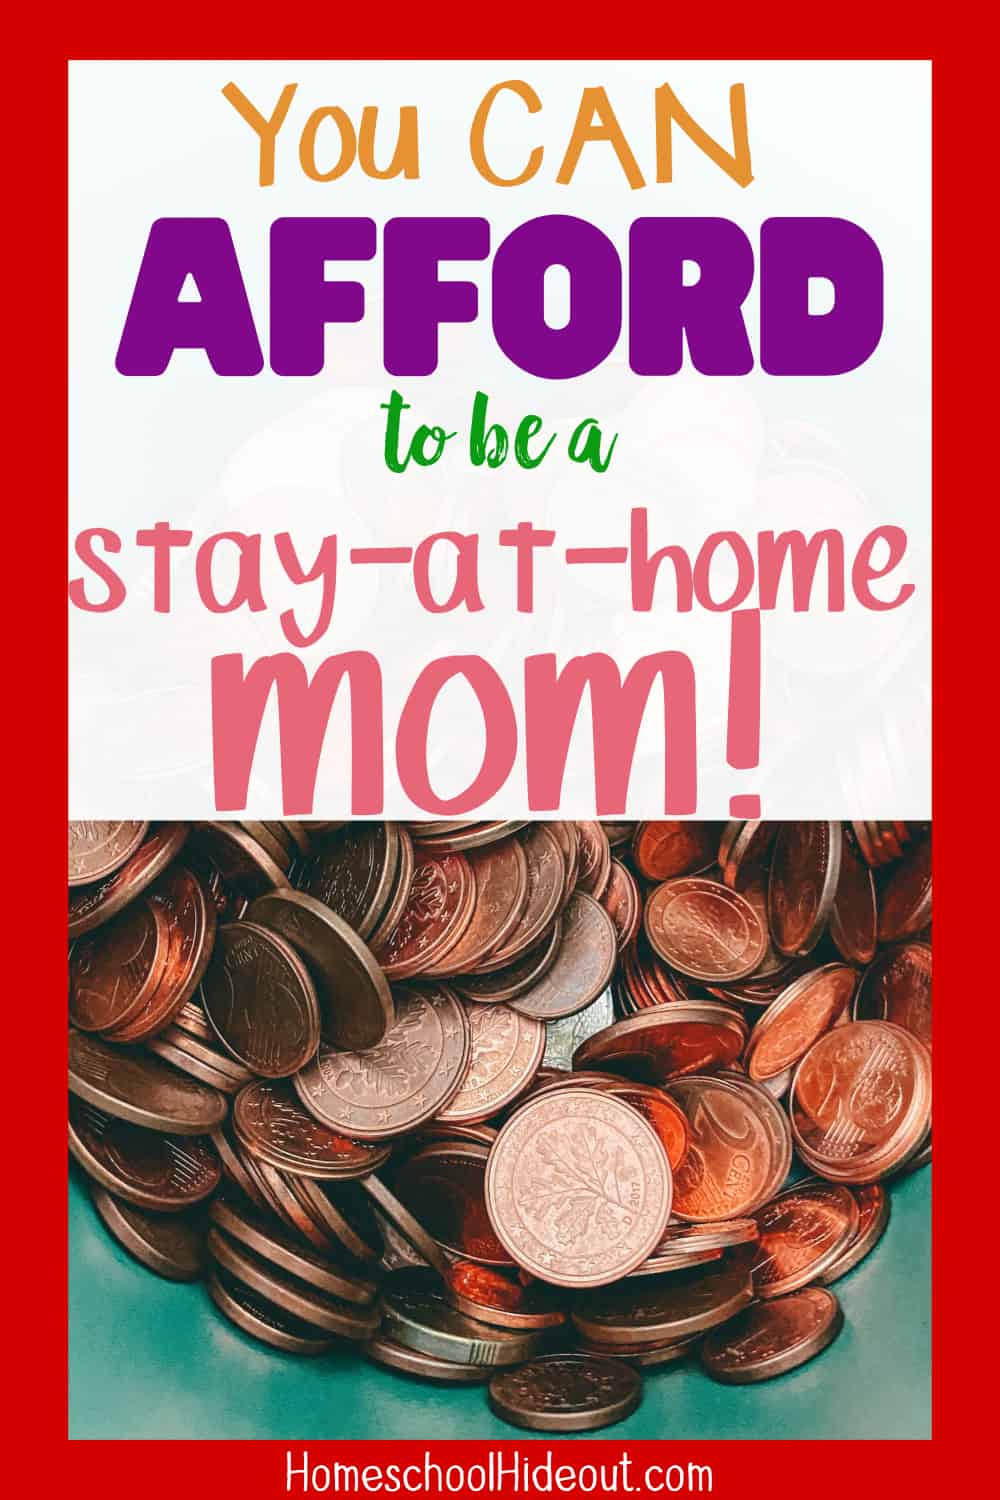 I never thought I could afford to be a stay-at-home mom but these will make it easier on me and the hubby!!! I love saving money!